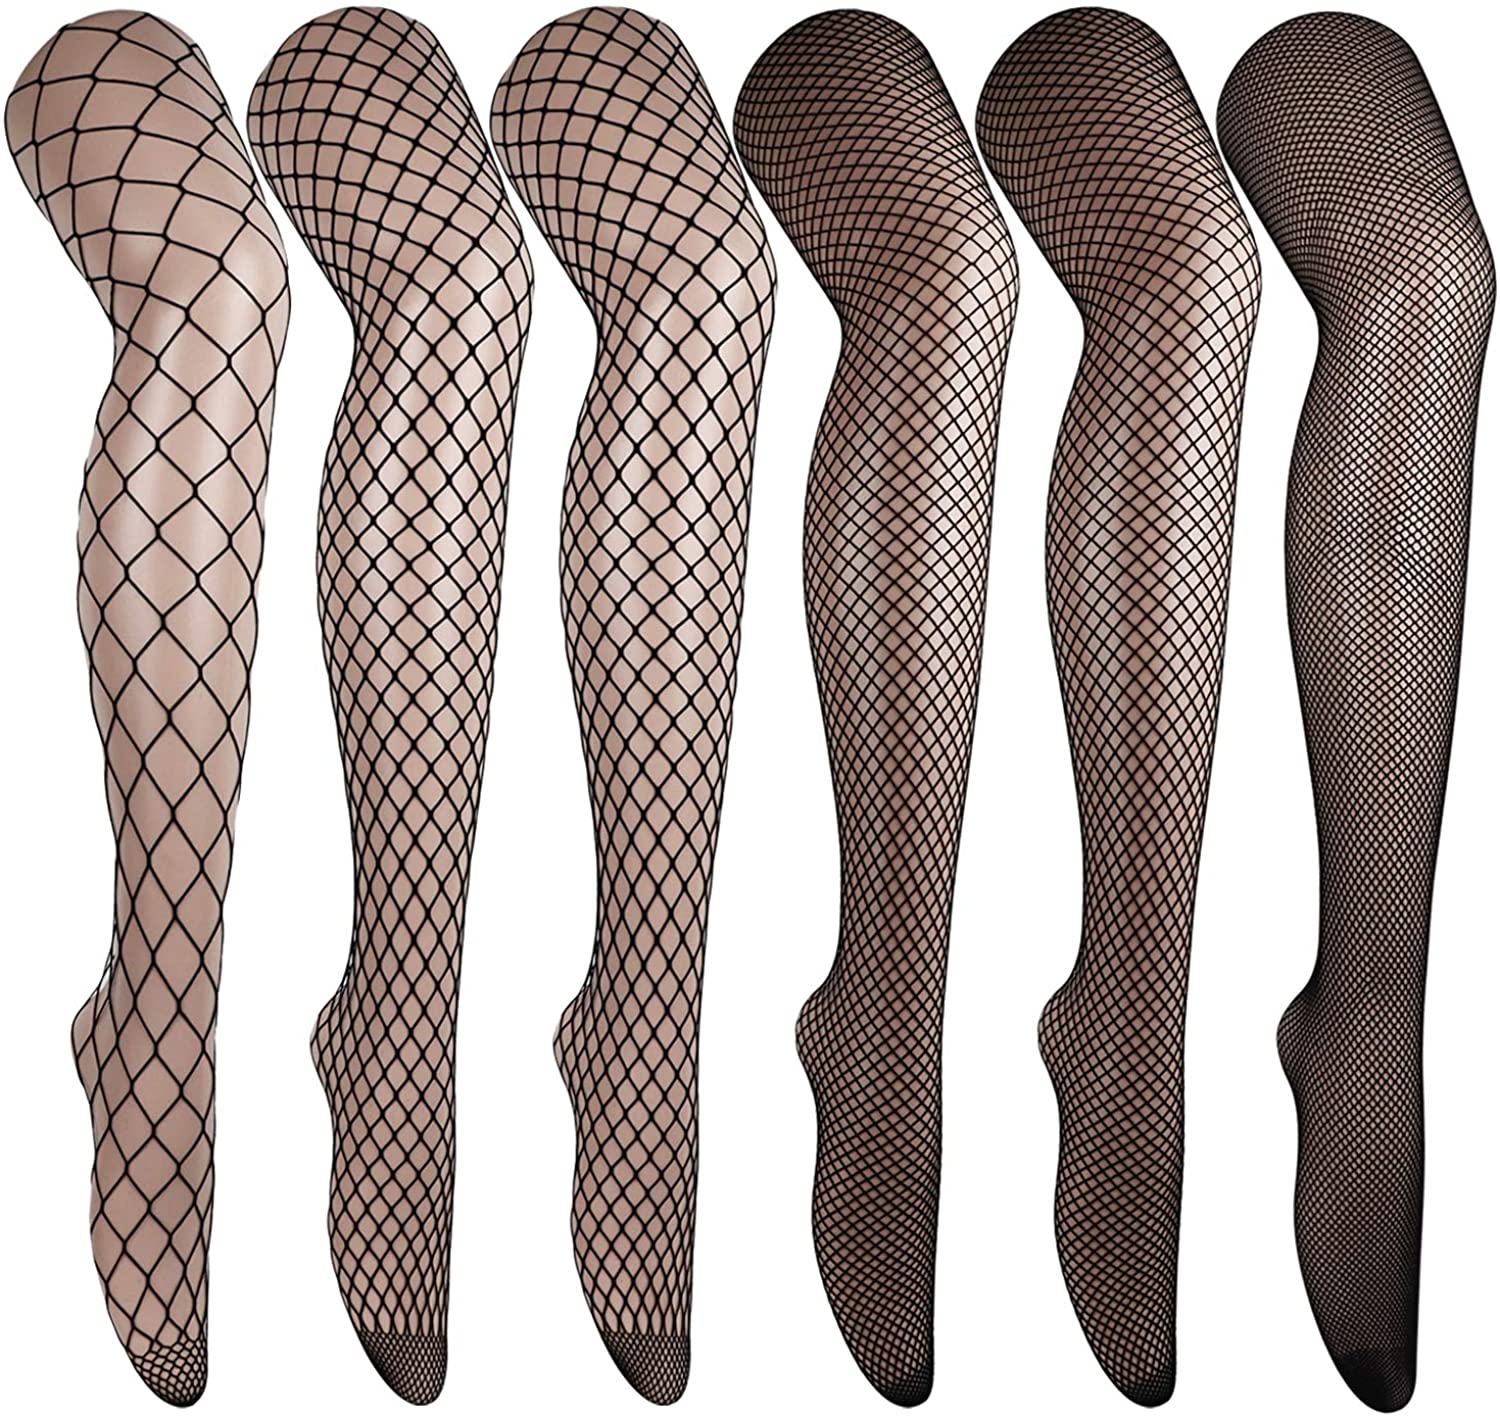 DRESHOW 6 Pack Fishnet Stockings Hight Waist Tights Thigh High Pantyhose 